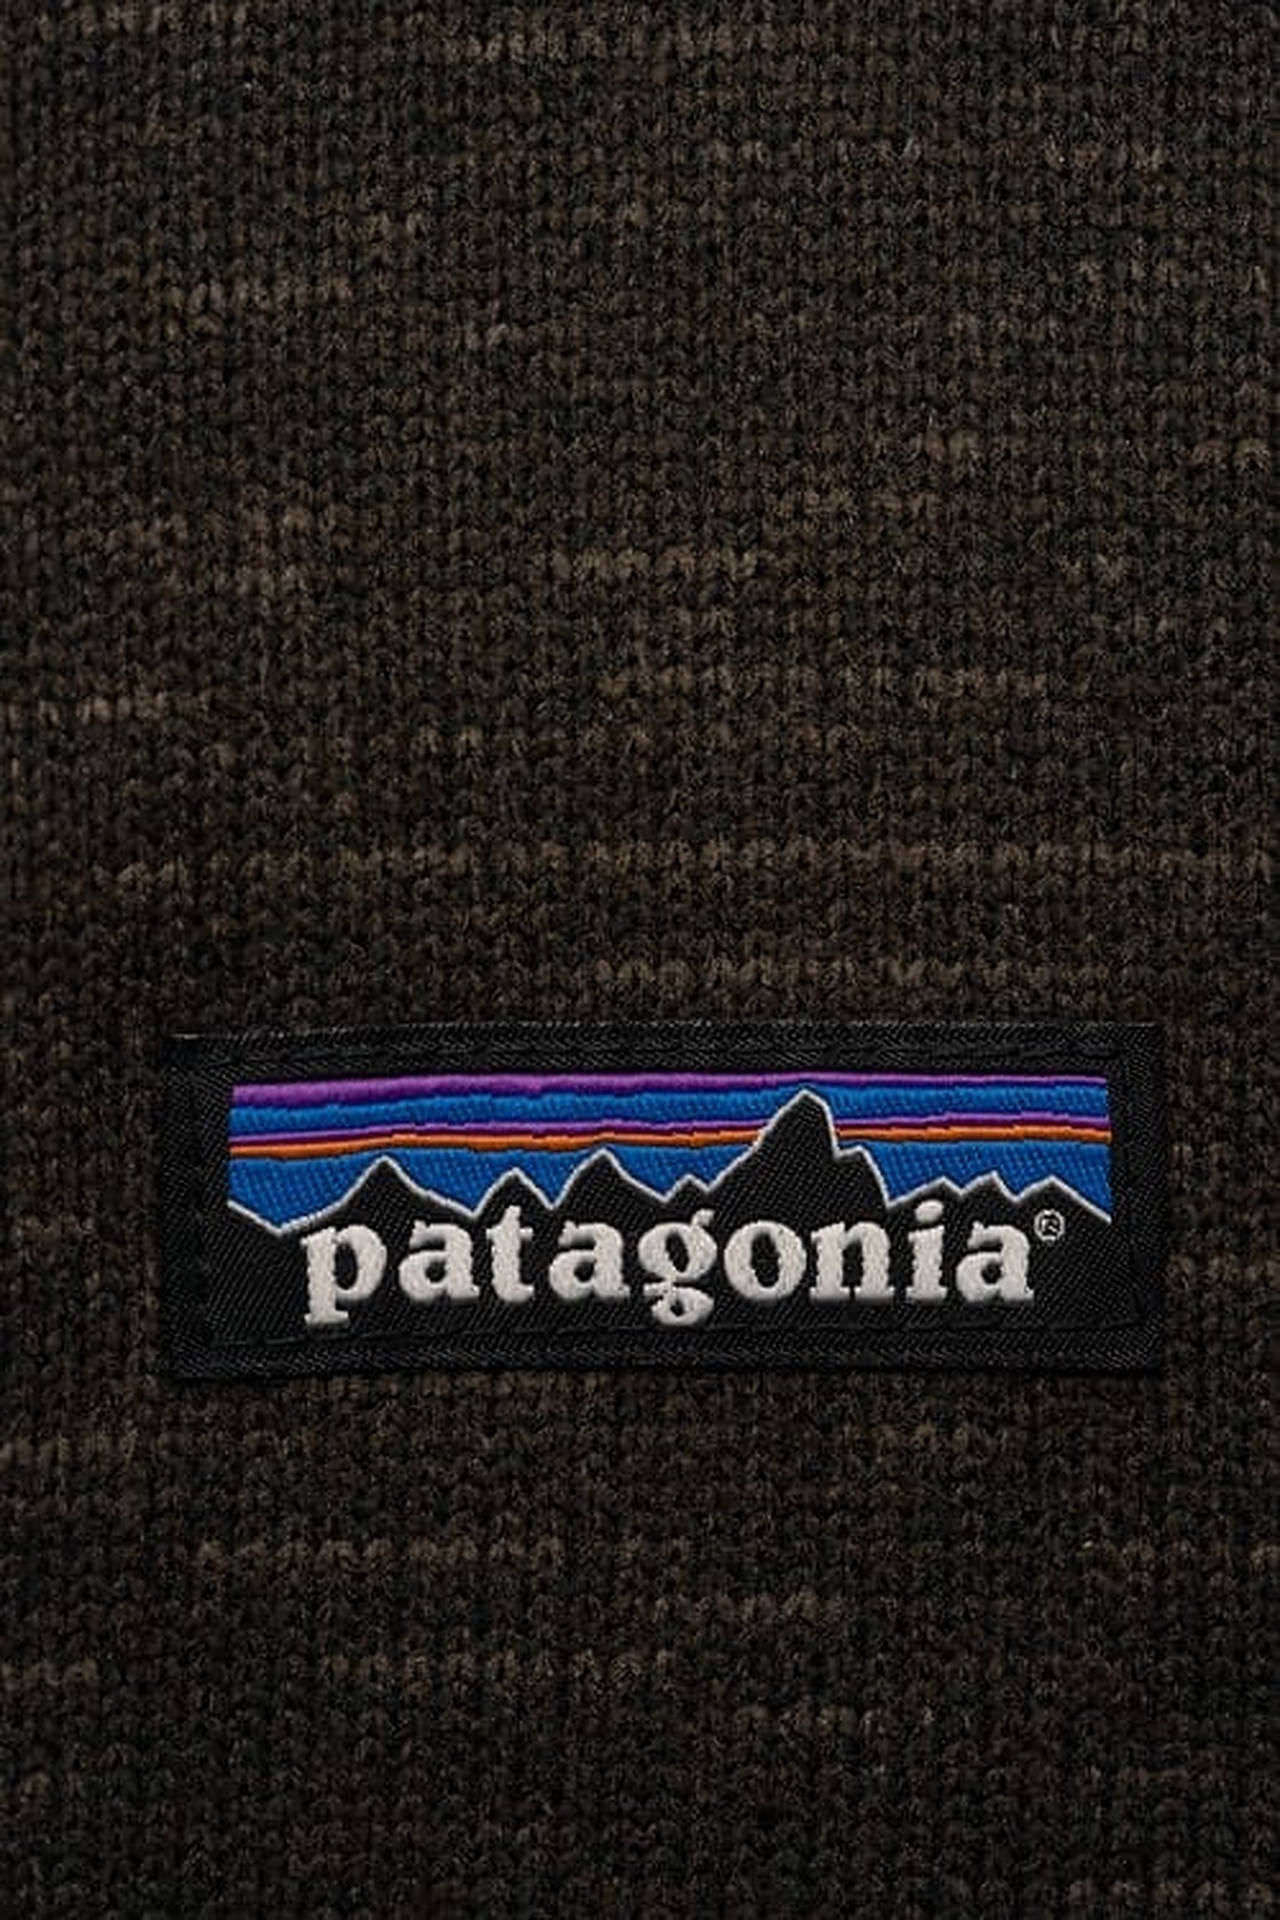 Caption: "patagonia Company Logo Against Mountain Background" Wallpaper